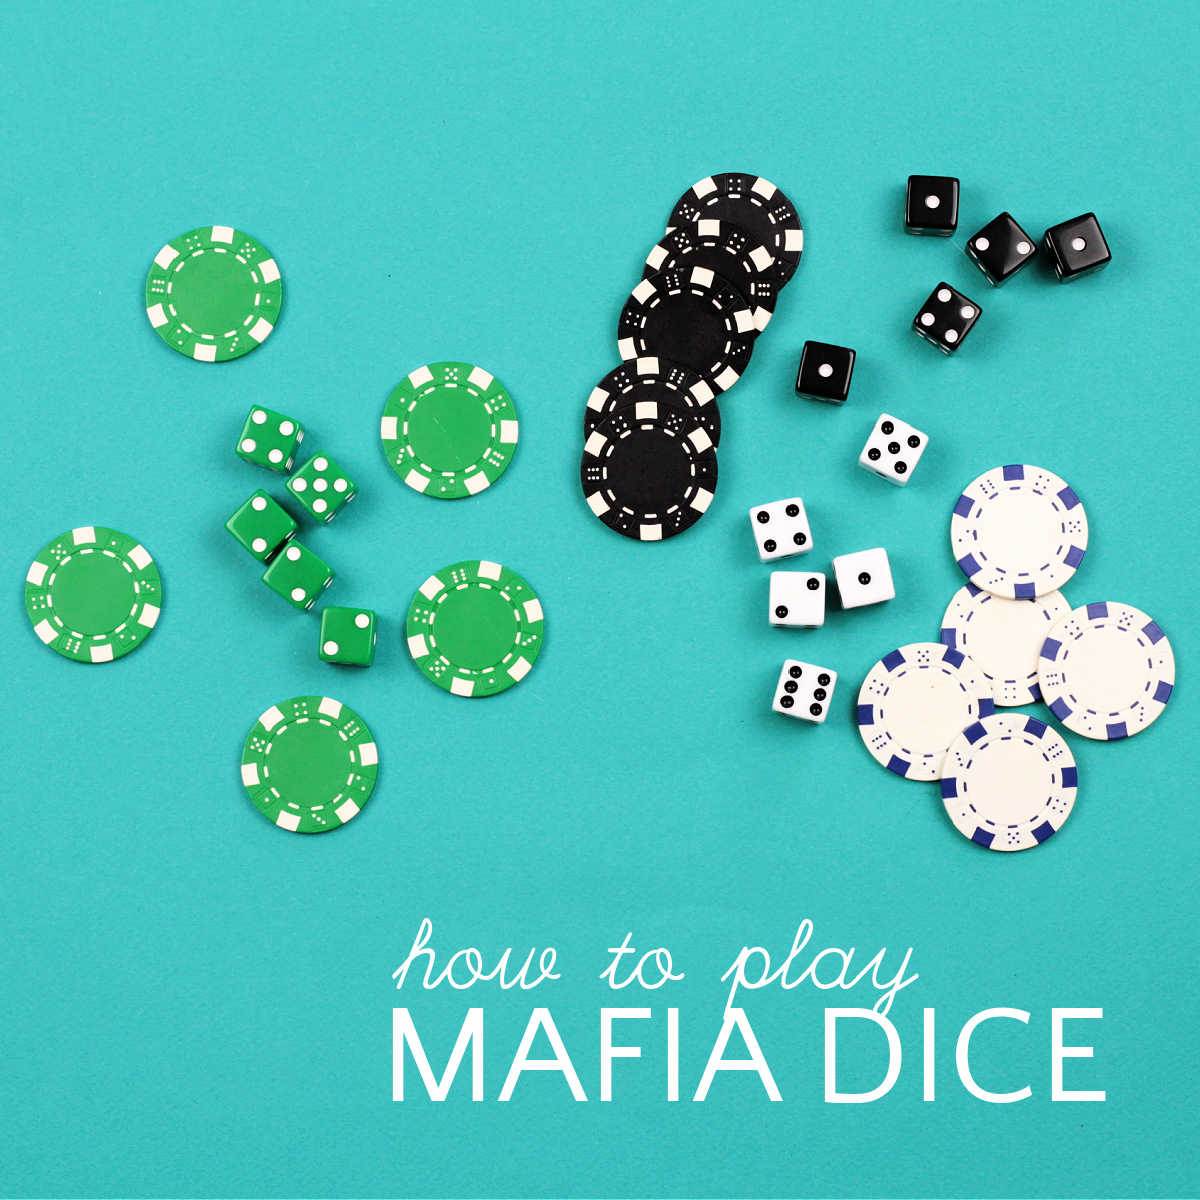 Play Mafia dice with 5 green dice and chips 5 black dice and chips and 5 white dice and chips